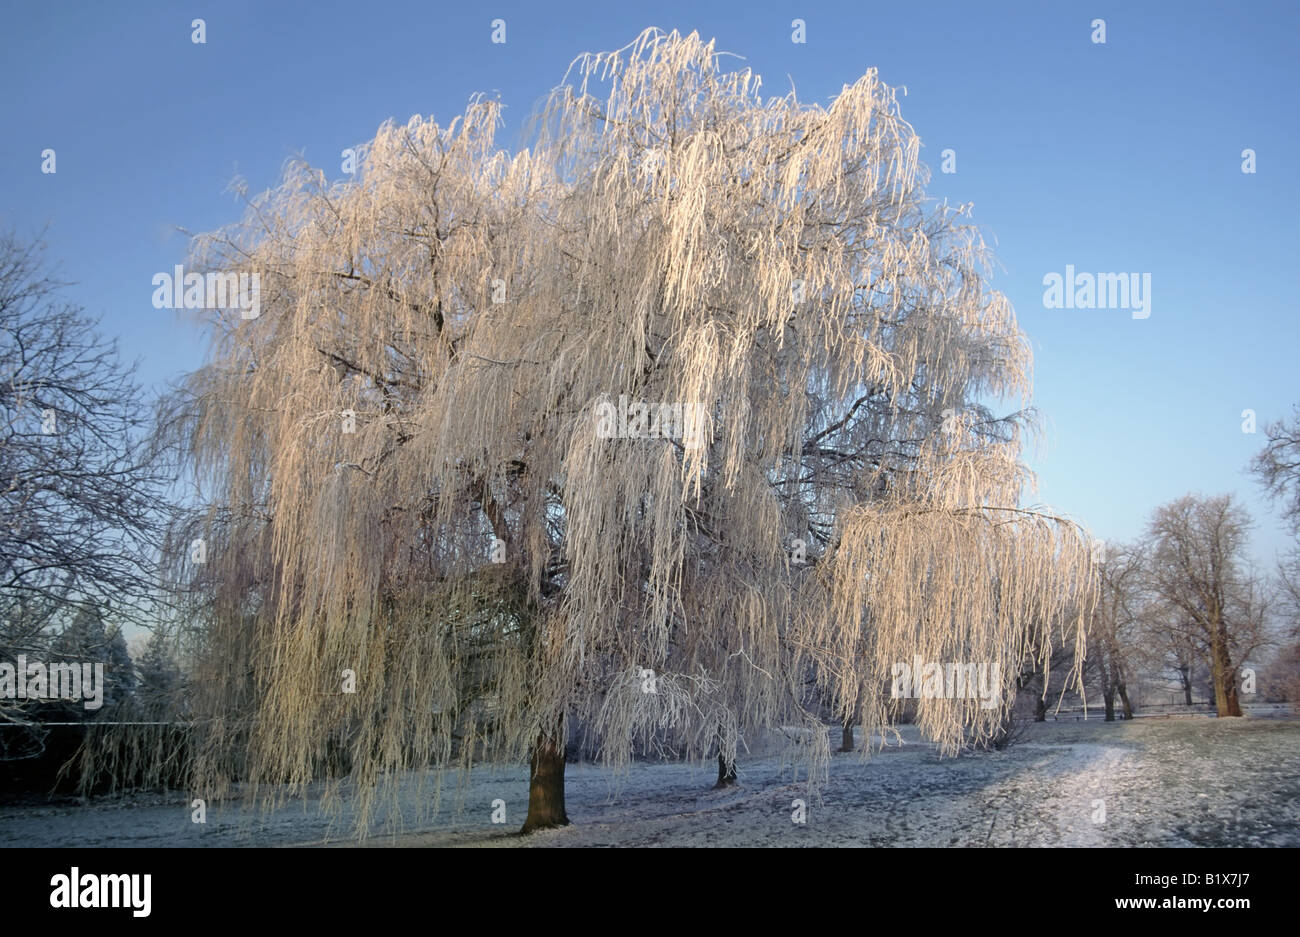 Weeping Willow tree natural nature in winter landscape of frost and snow covering Essex England UK Stock Photo